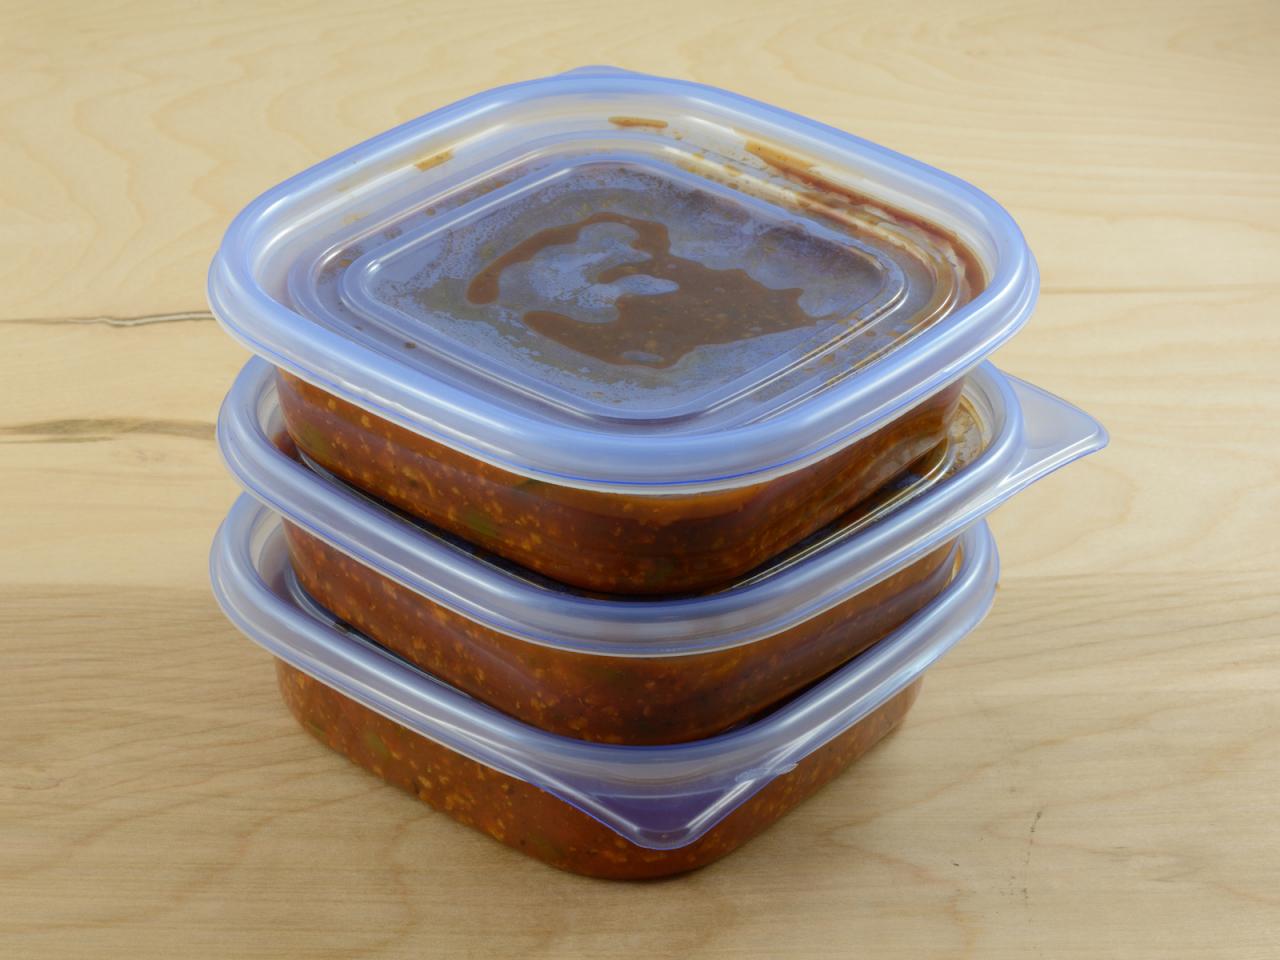 My tupperware for the rest of their life after eating something